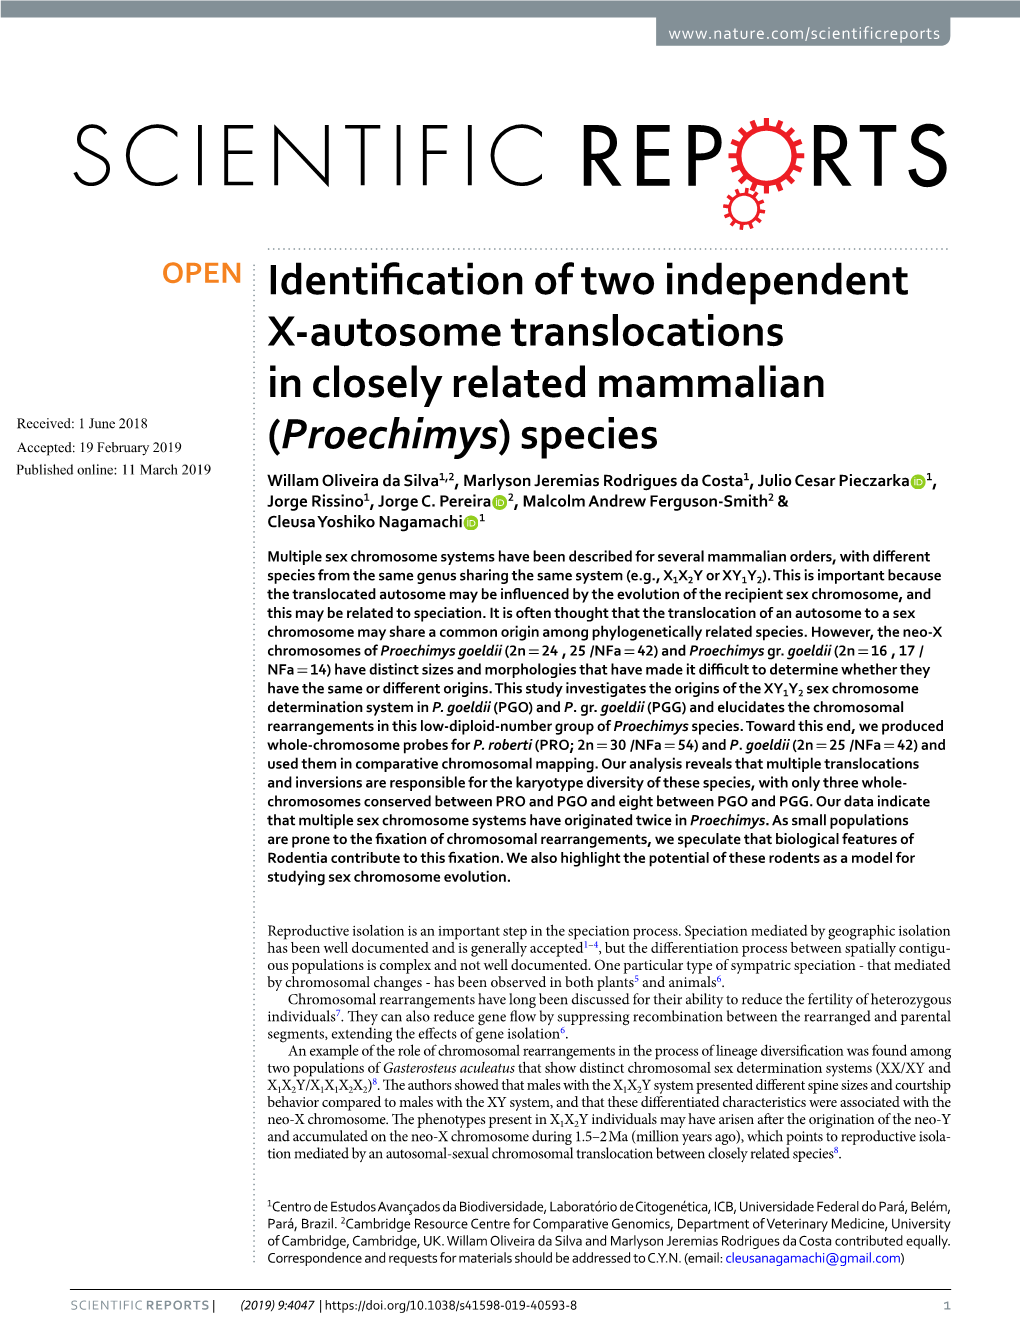 Identification of Two Independent X-Autosome Translocations in Closely Related Mammalian (Proechimys) Species